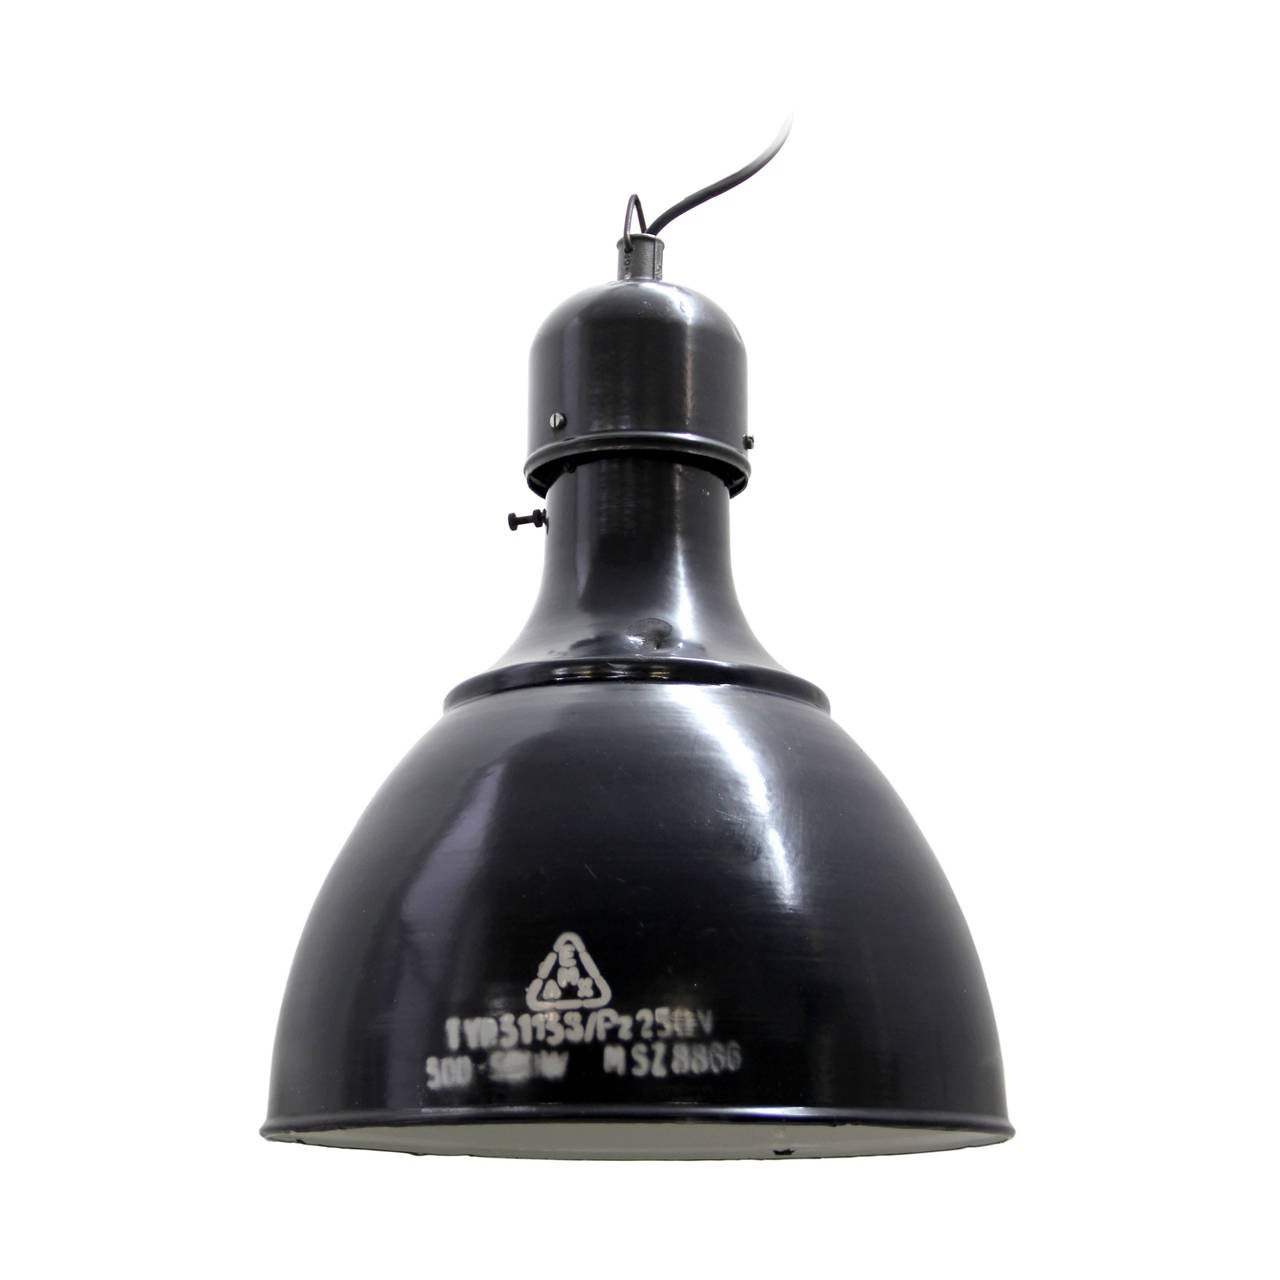 European Industrial Classic. Rare model. Used in warehouses and factories in east Europe. Weight 2.8 kg / 6,2 lb. UL listed wiring.

All lamps have been made suitable by international standards for incandescent light bulbs, energy-efficient and